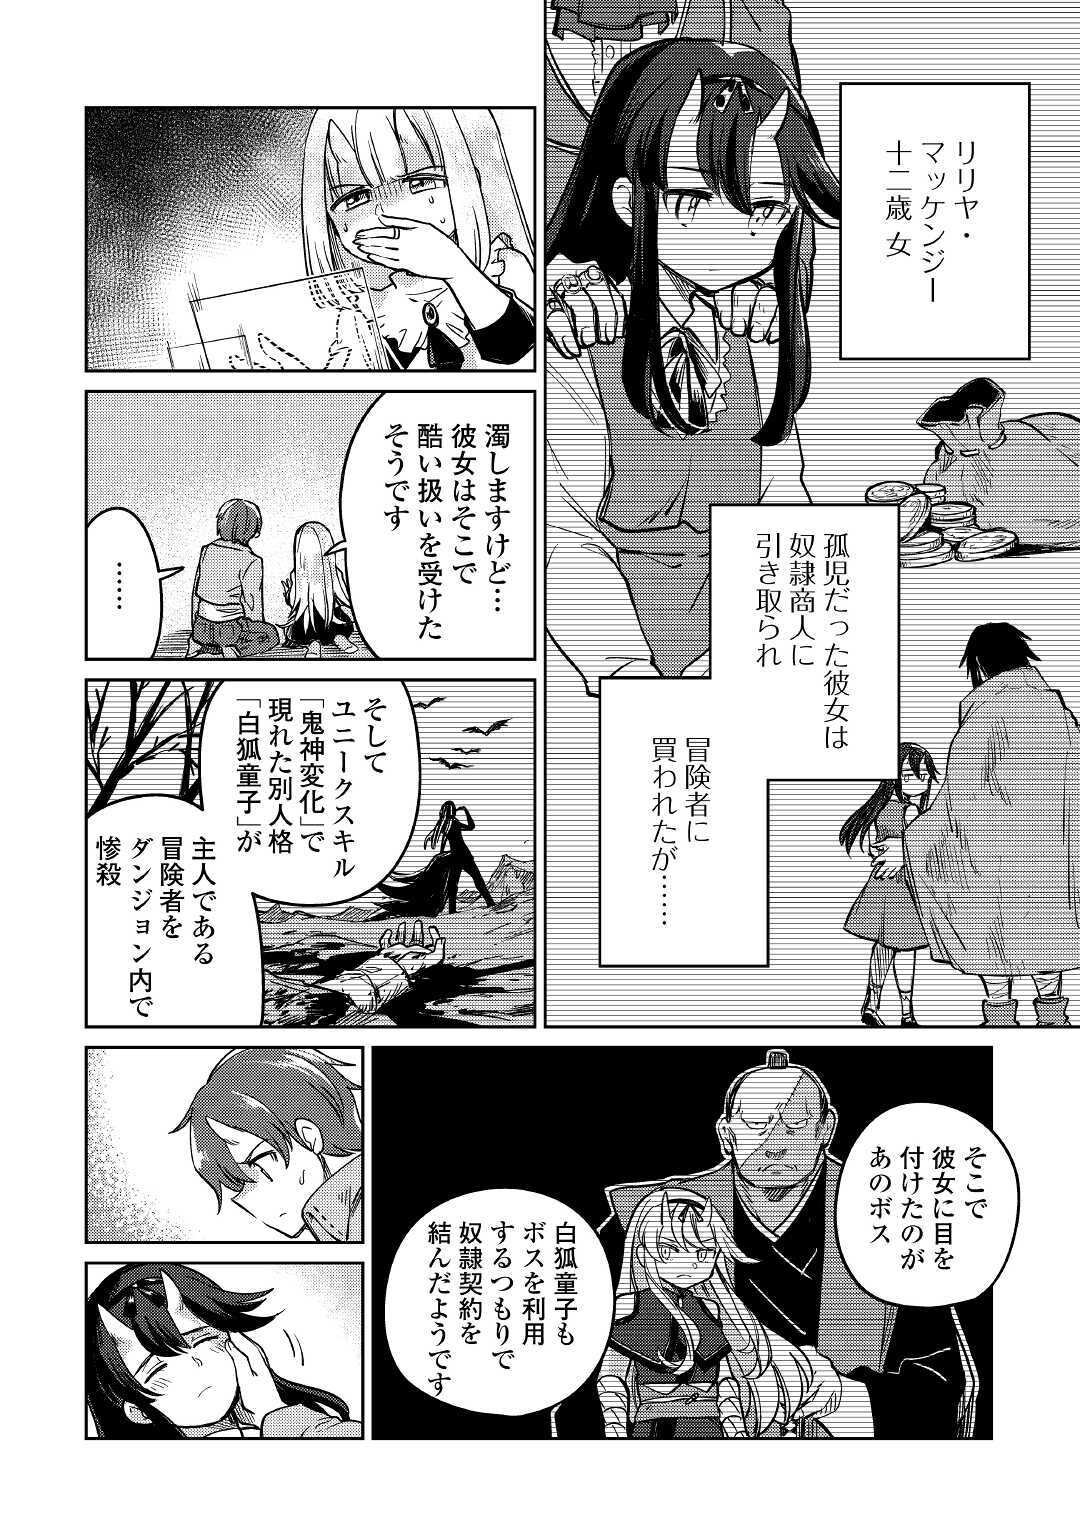 The Former Structural Researcher’s Story of Otherworldly Adventure 第31話 - Page 14